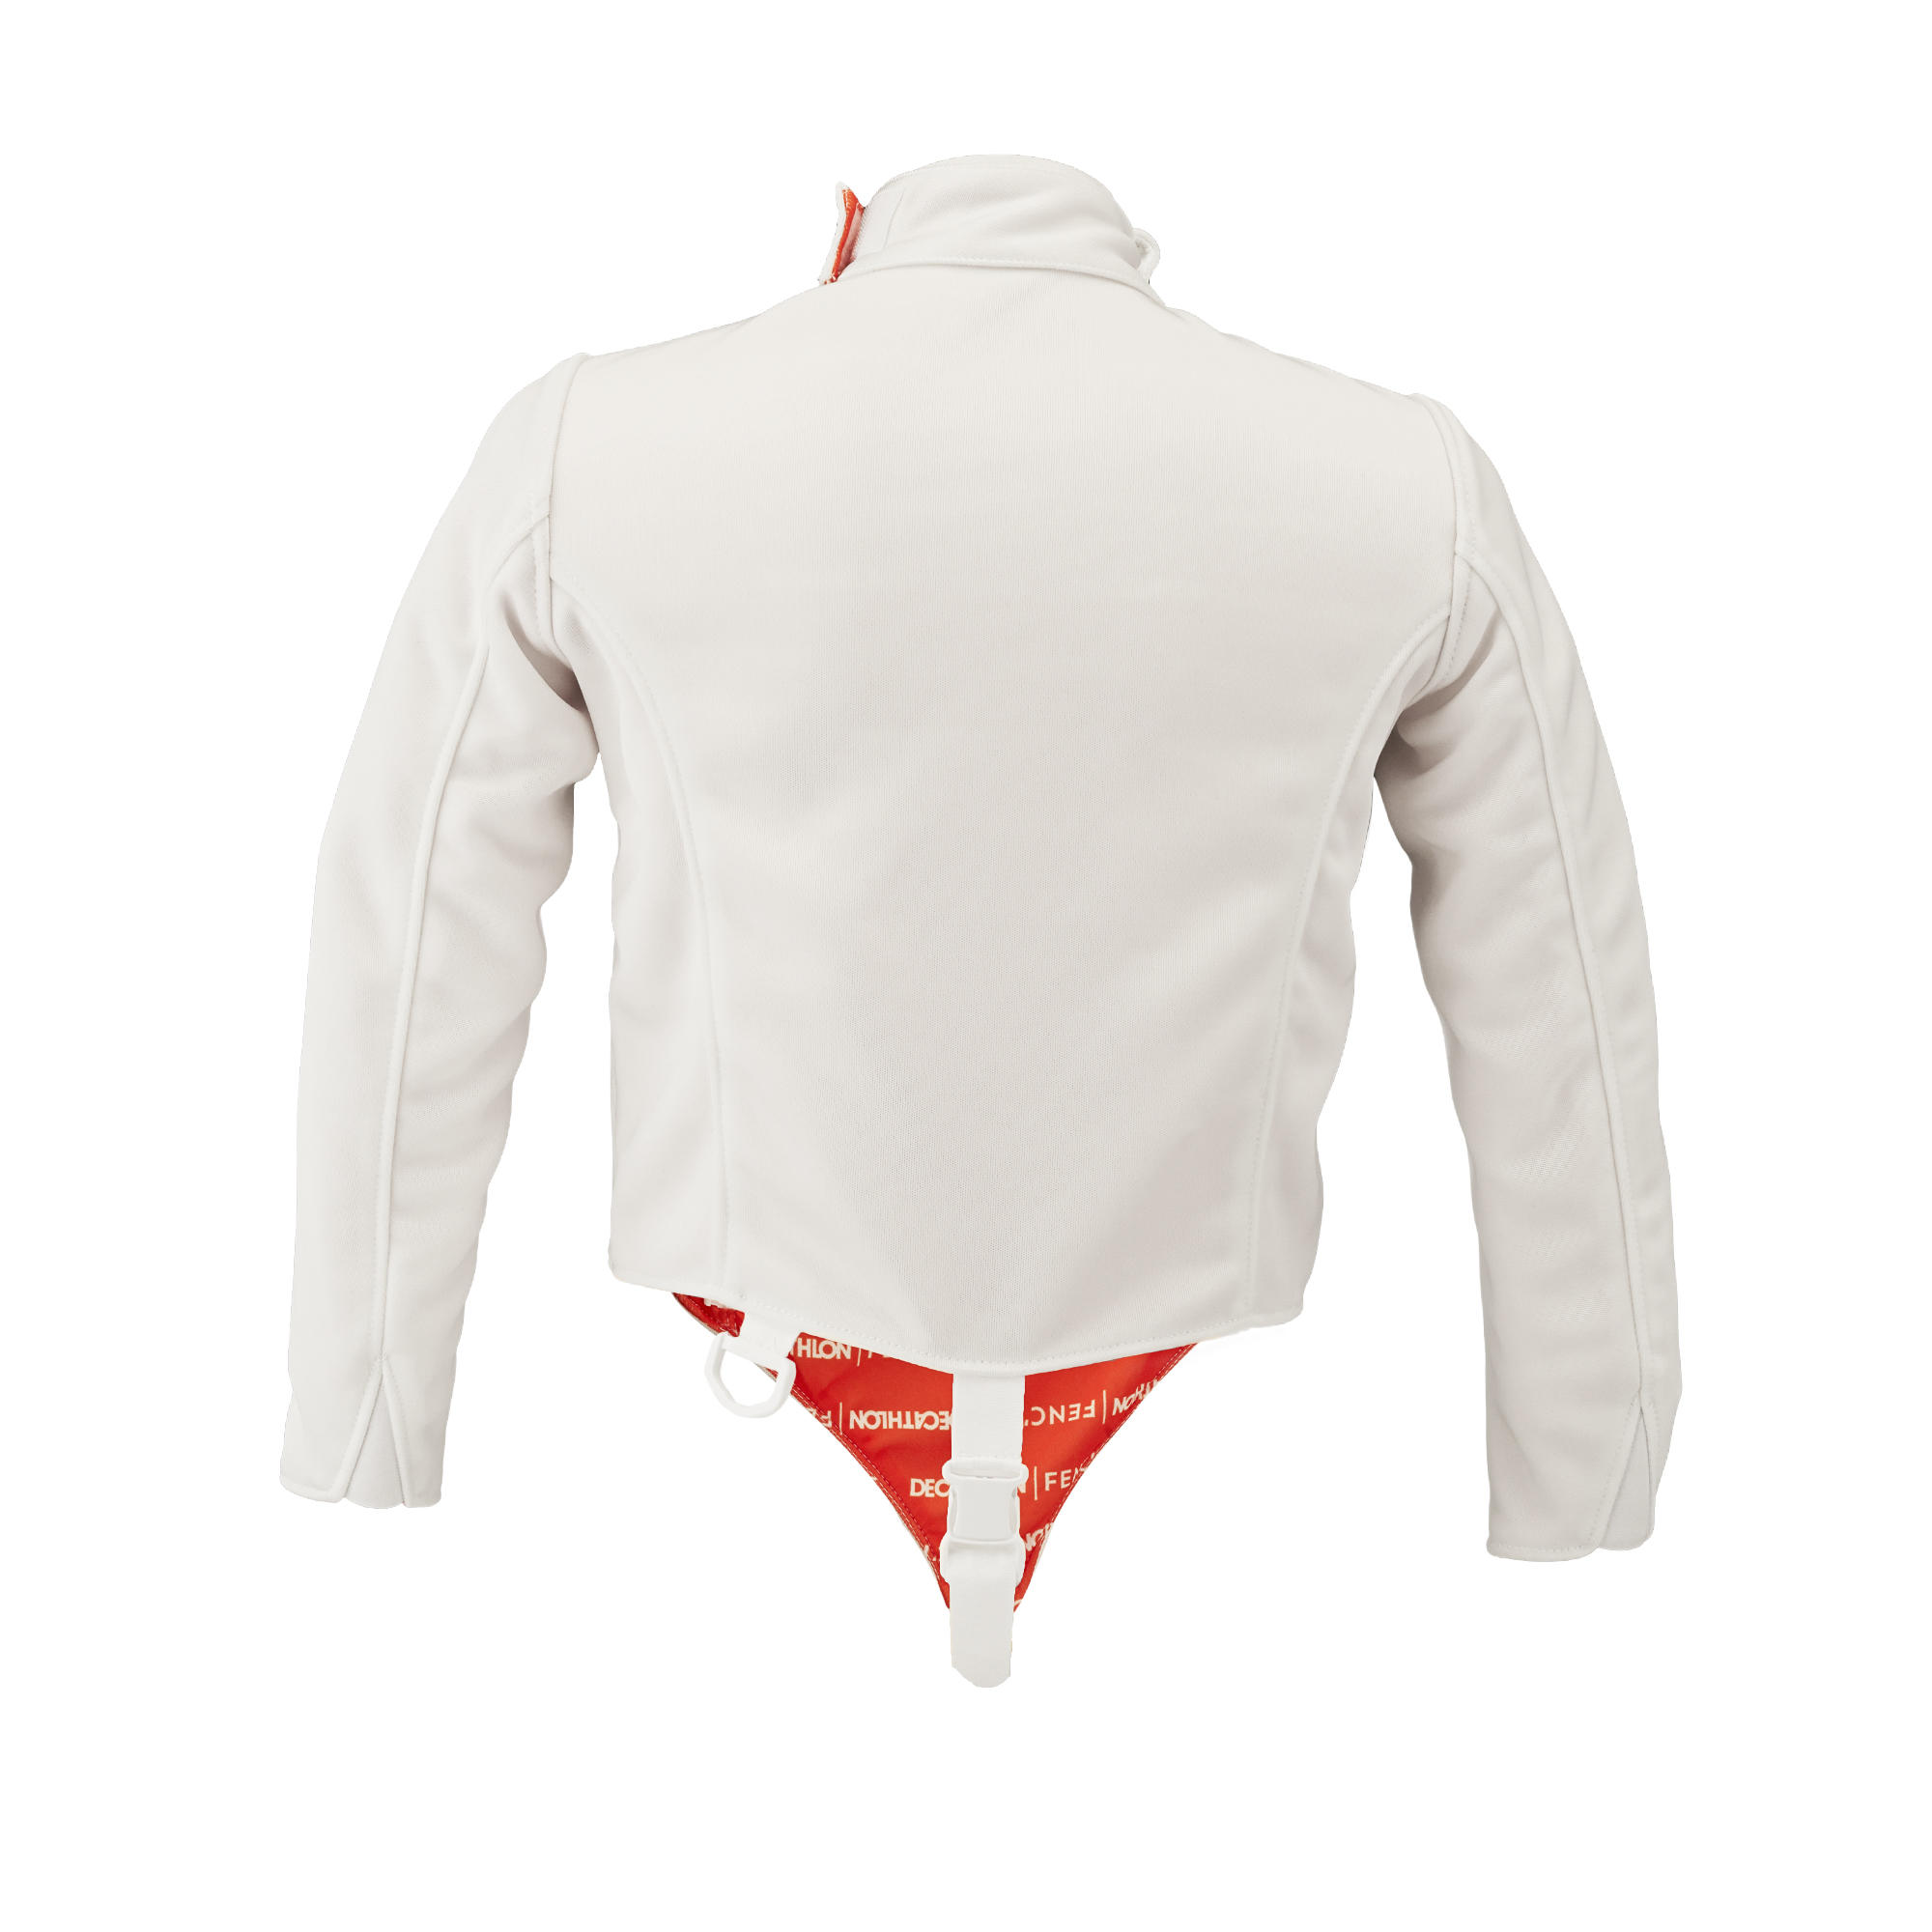 Kids' Right-Handed Fencing Jacket 350N 2/5